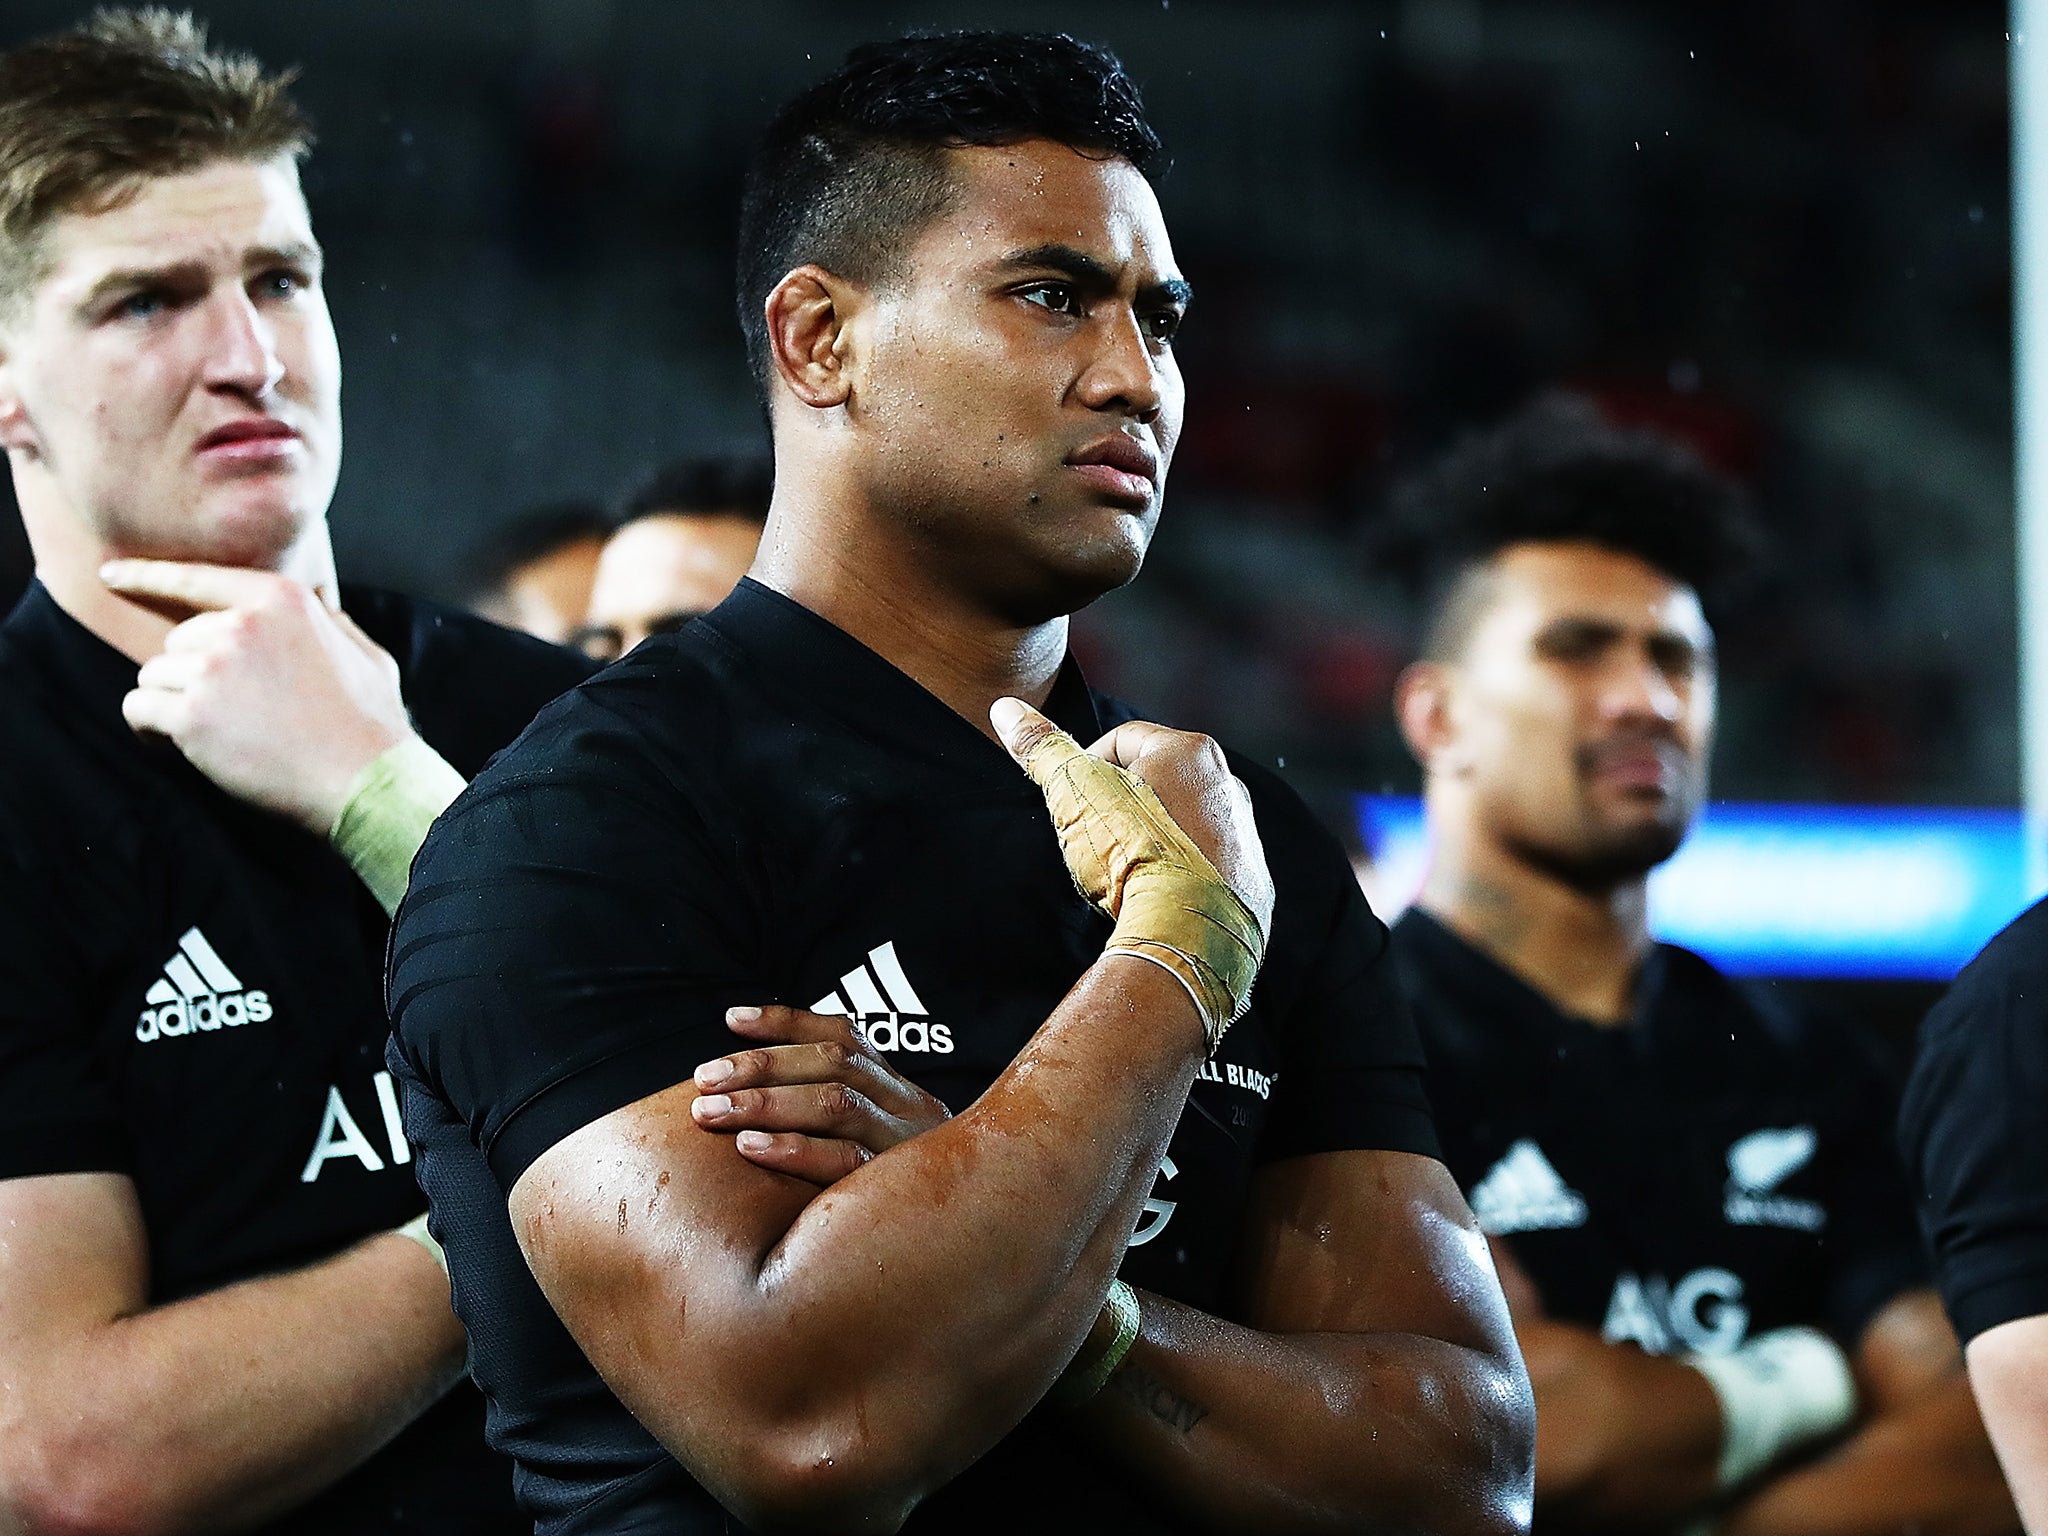 Julian Savea will face New Zealand this weekend when he plays for the Barbarians